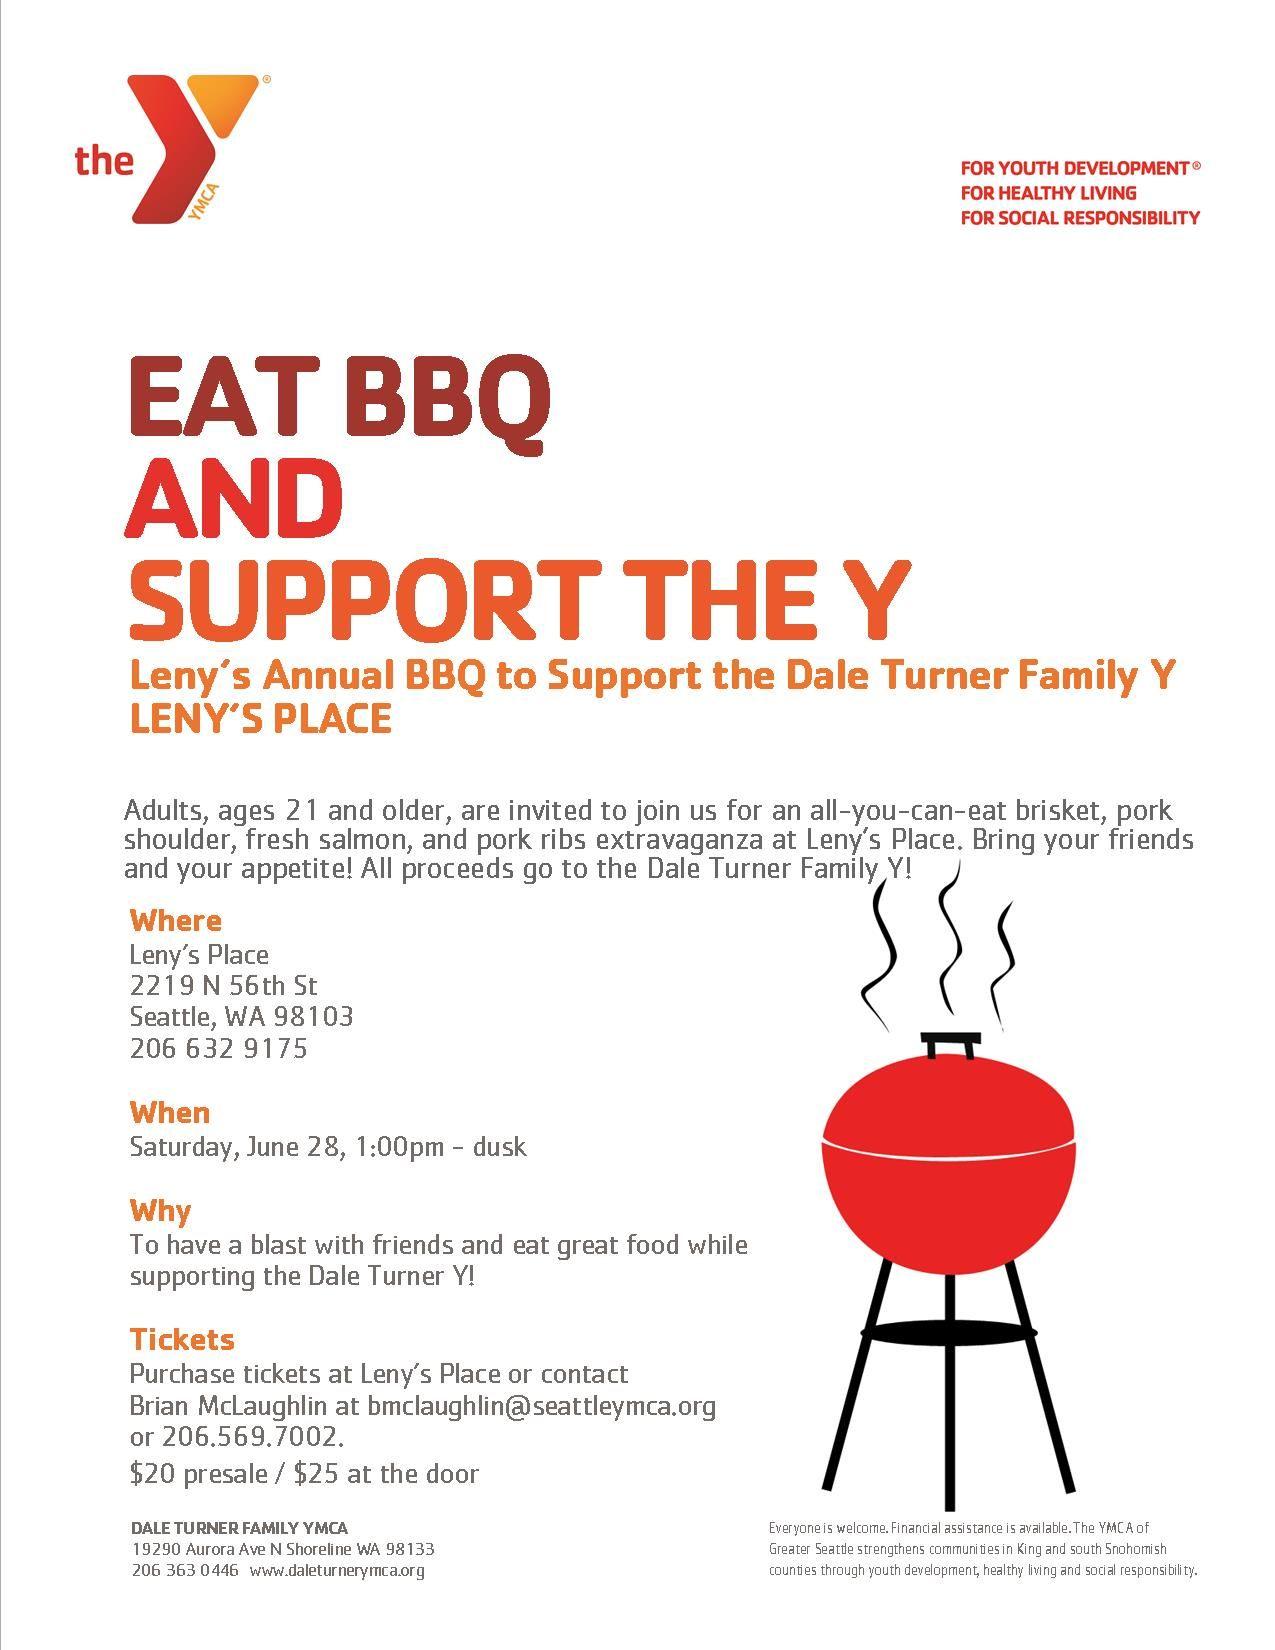 Family Y Logo - Mark your calendars for Leny's Annual BBQ to support the Dale Turner